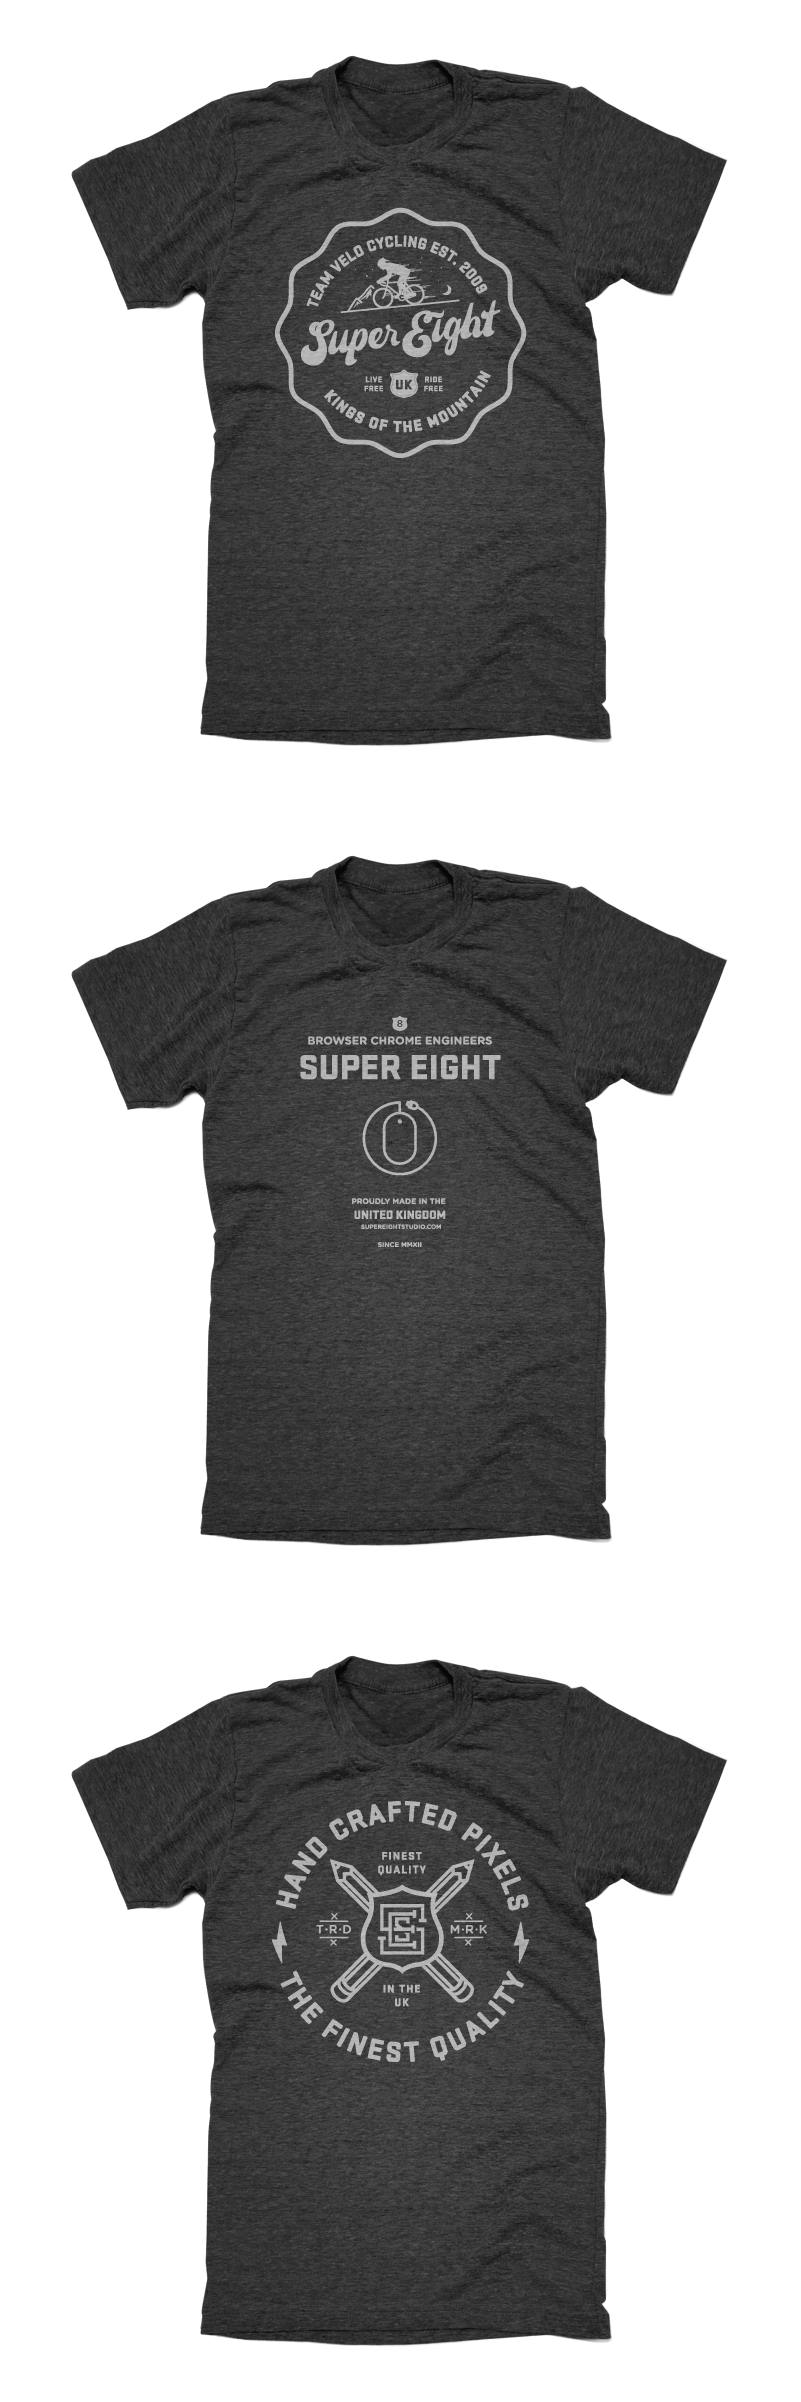 Dribbble - SUPEREIGHT_TEE-03.png by Nick Slater